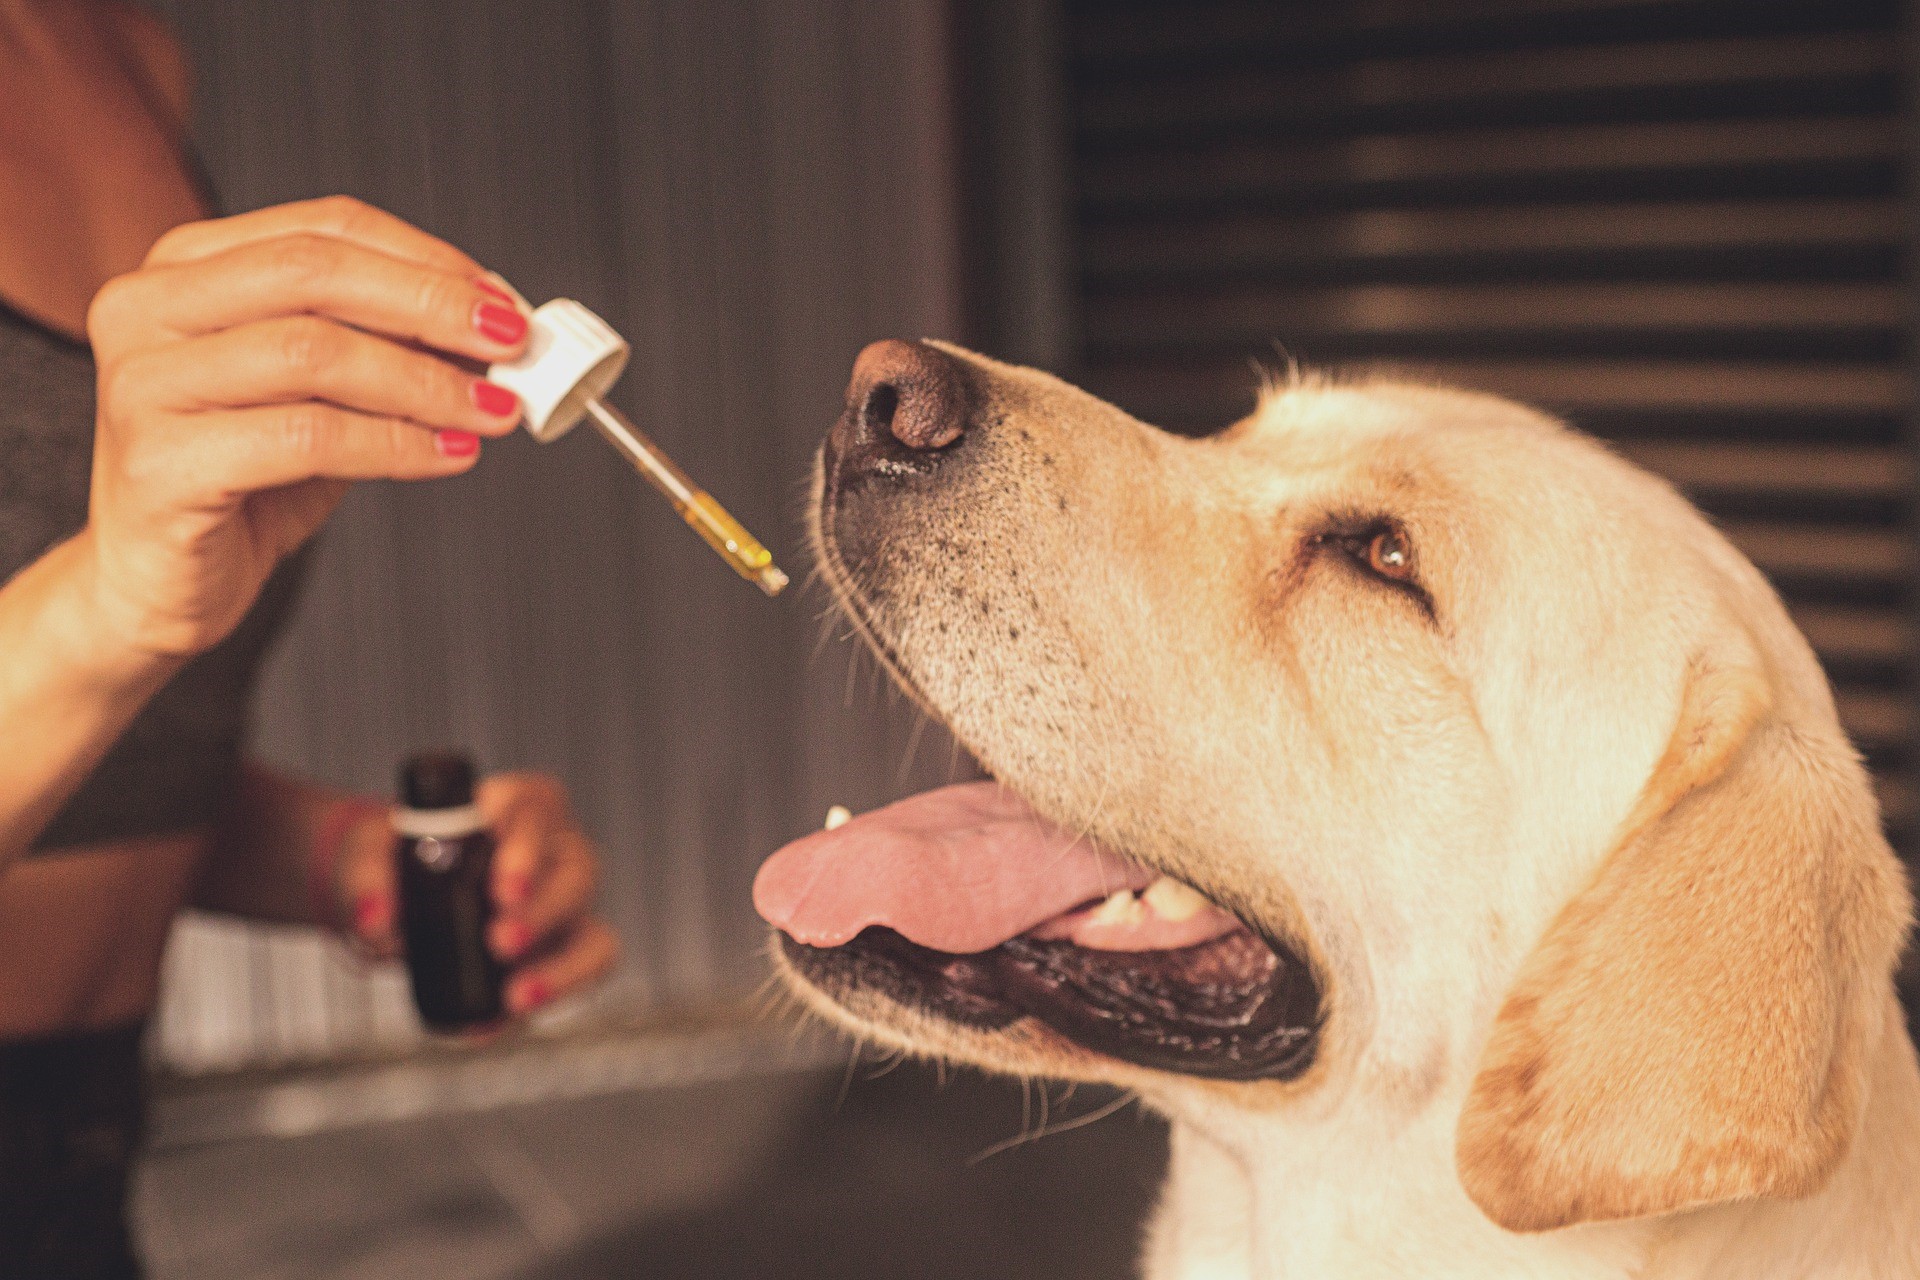 Where to Buy CBD for Dogs: Local Retailers You Can Trust